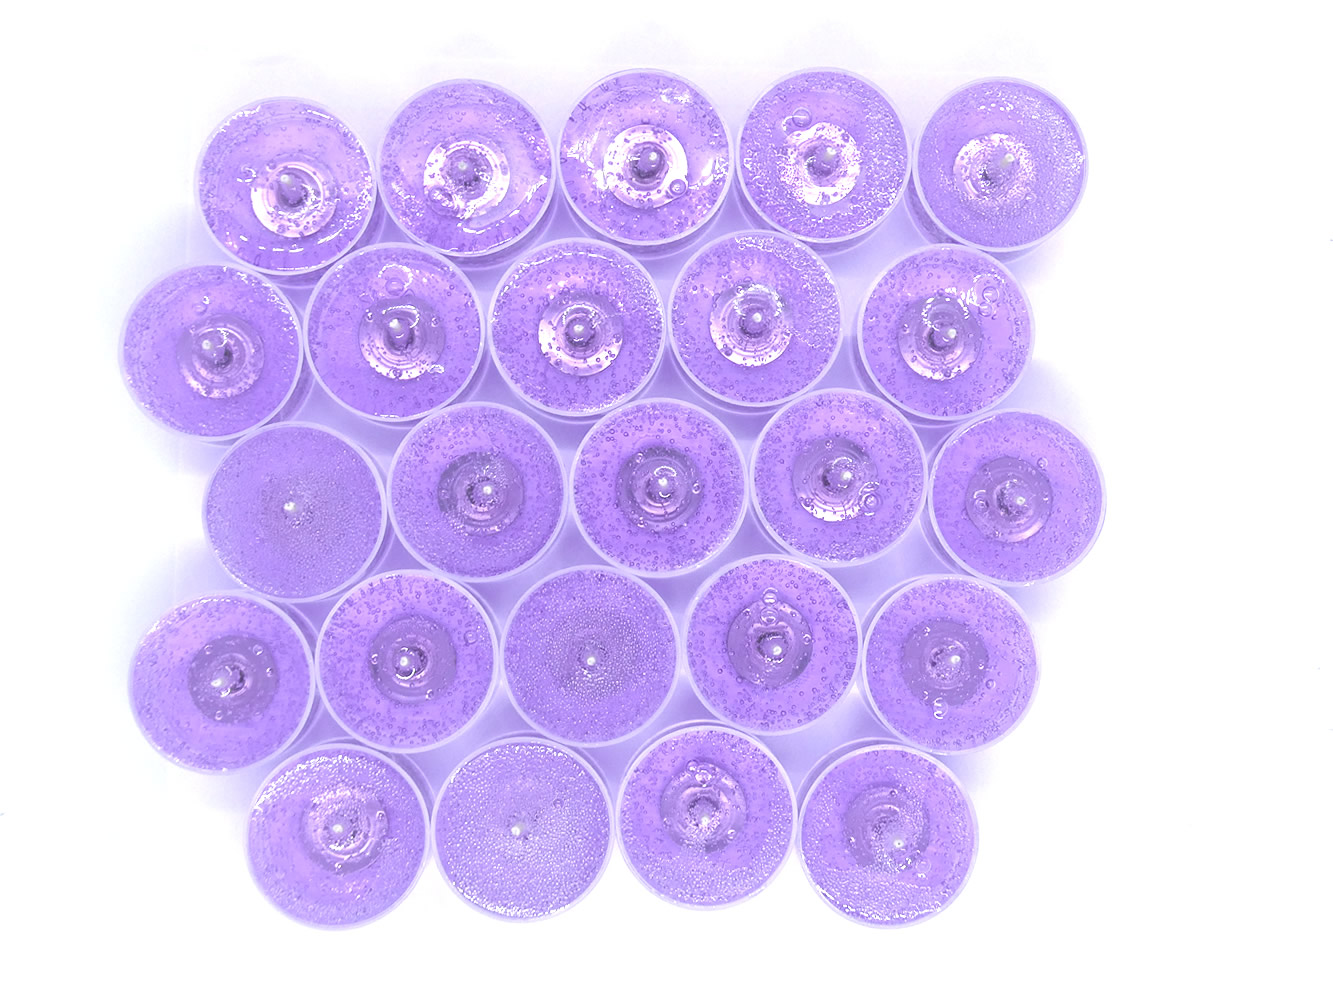 Lavender Scented Gel Candle Tea Lights - 4 pk. - Click Image to Close